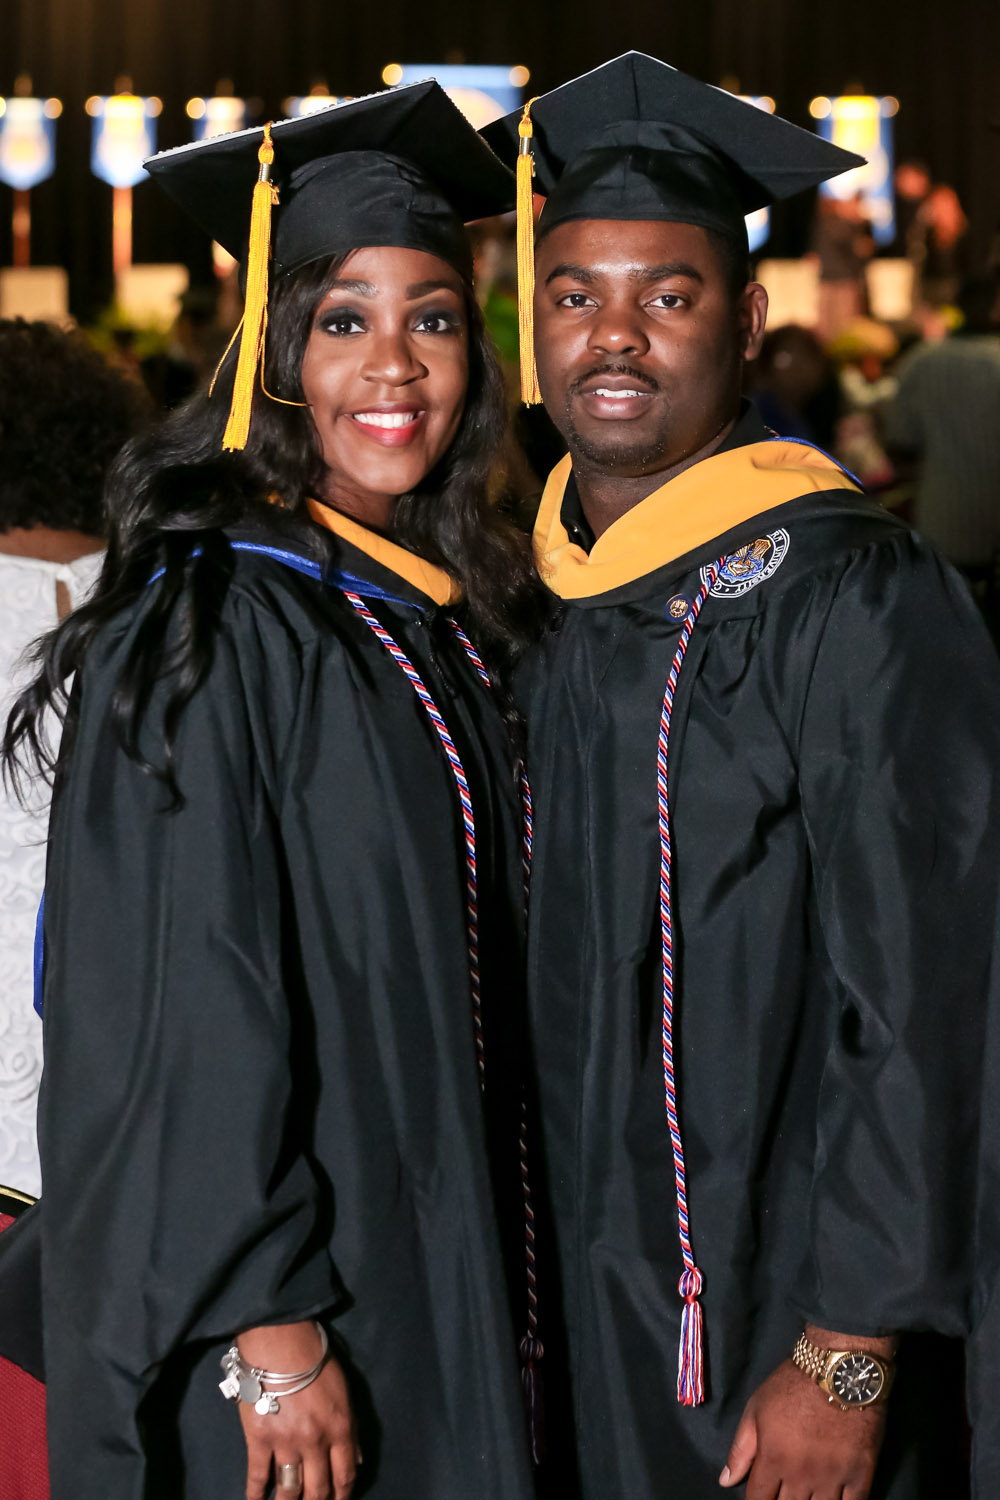 Christian Allen, left, and Gilbert Galloway Jr. graduated together at the Columbia Southern University commencement ceremonies on Oct.28 in Orange Beach, Ala.